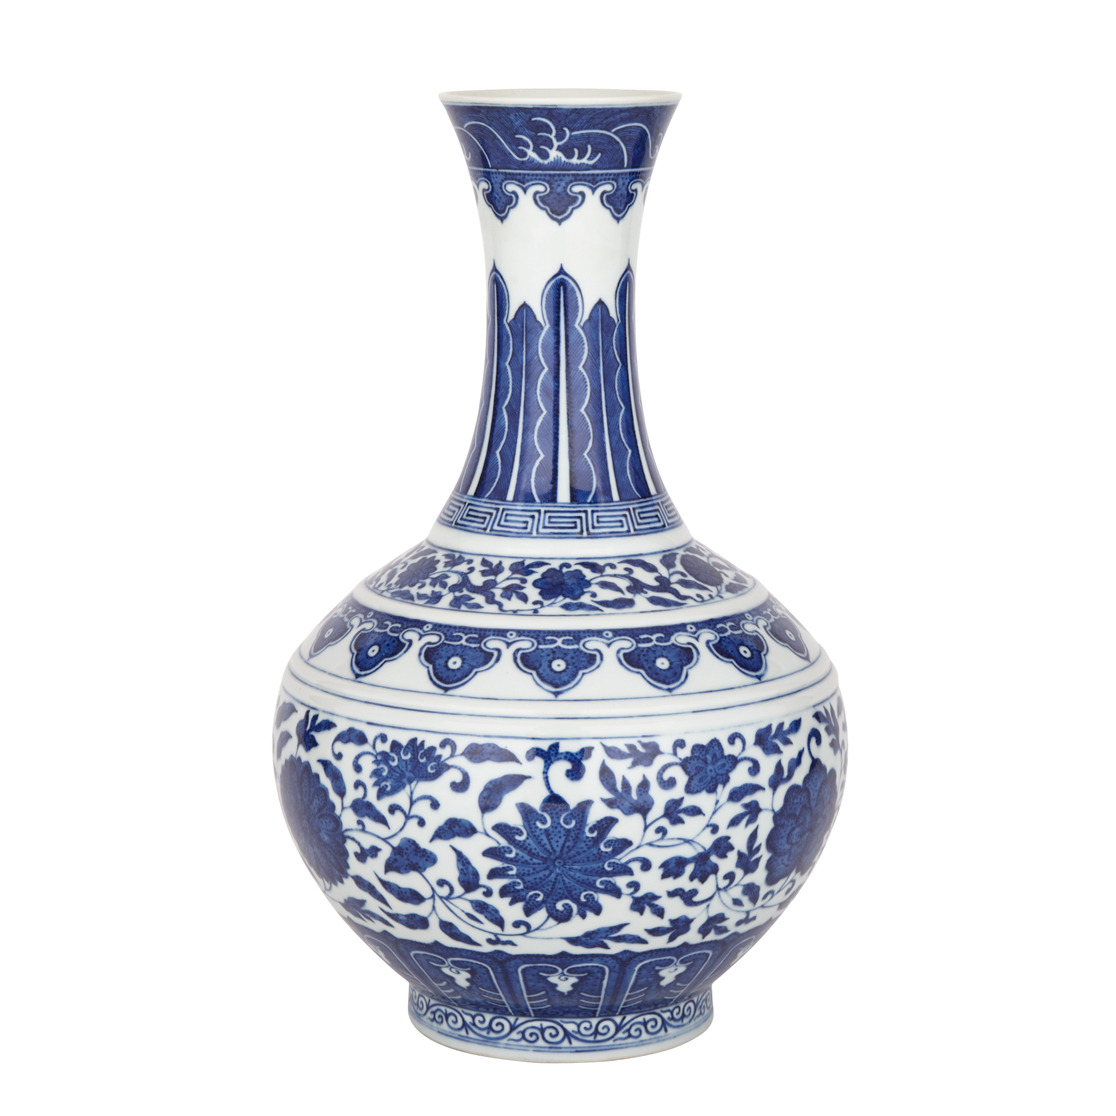 Fine Blue and White Bottle Vase, GUANGXU SIX-CHARACTER MARK IN UNDERGLAZE BLUE AND OF THE PERIOD (1875-1908)